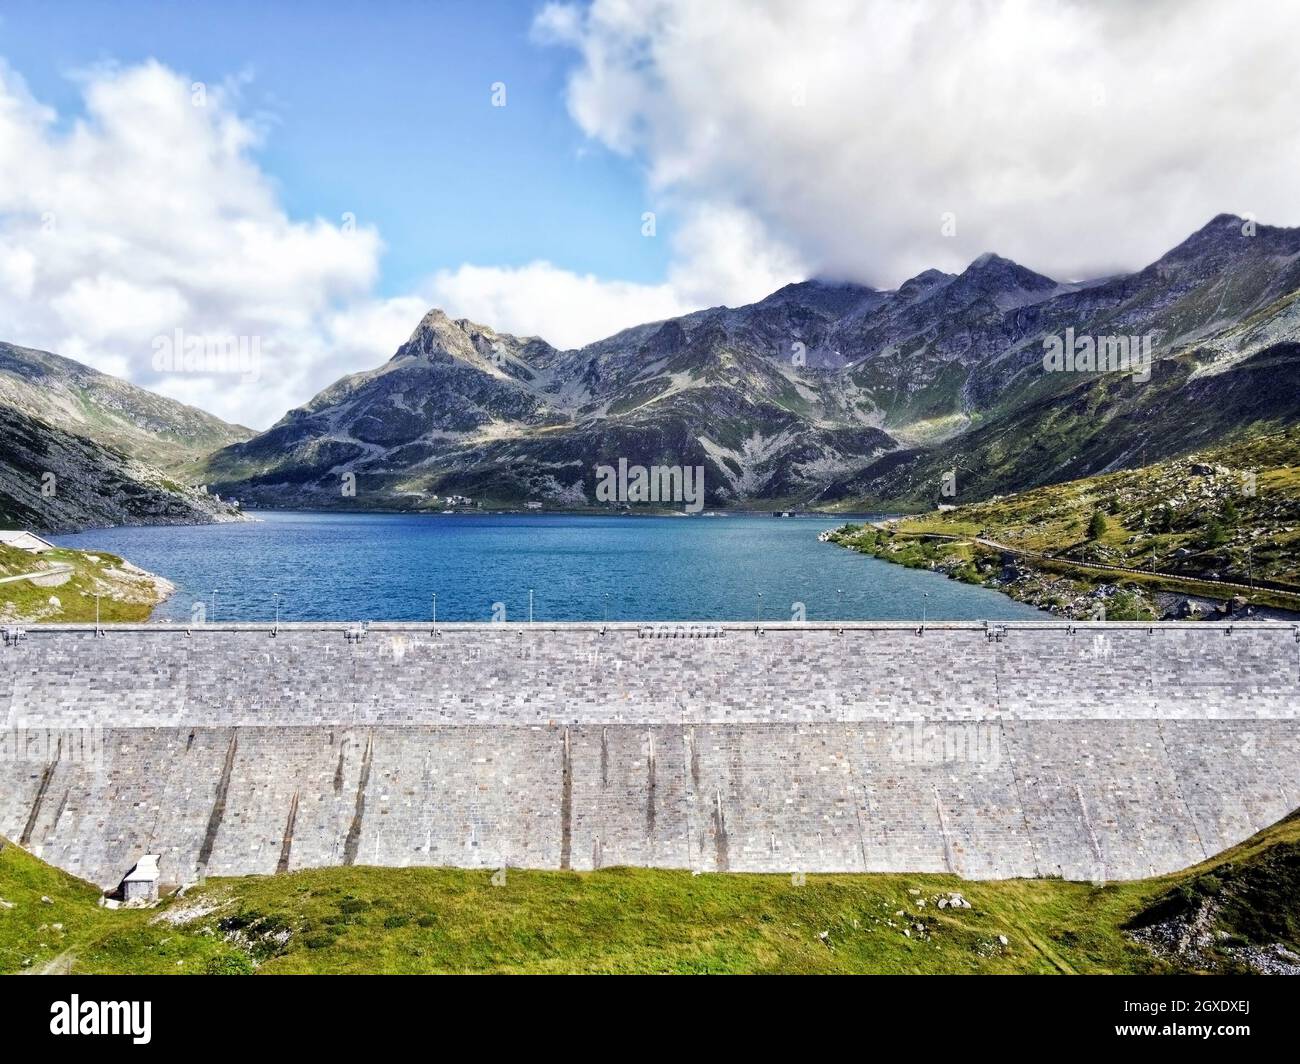 Concrete dam and water reservoir surrounded by mountains with green slopes under blue cloudy sky in summer day Stock Photo